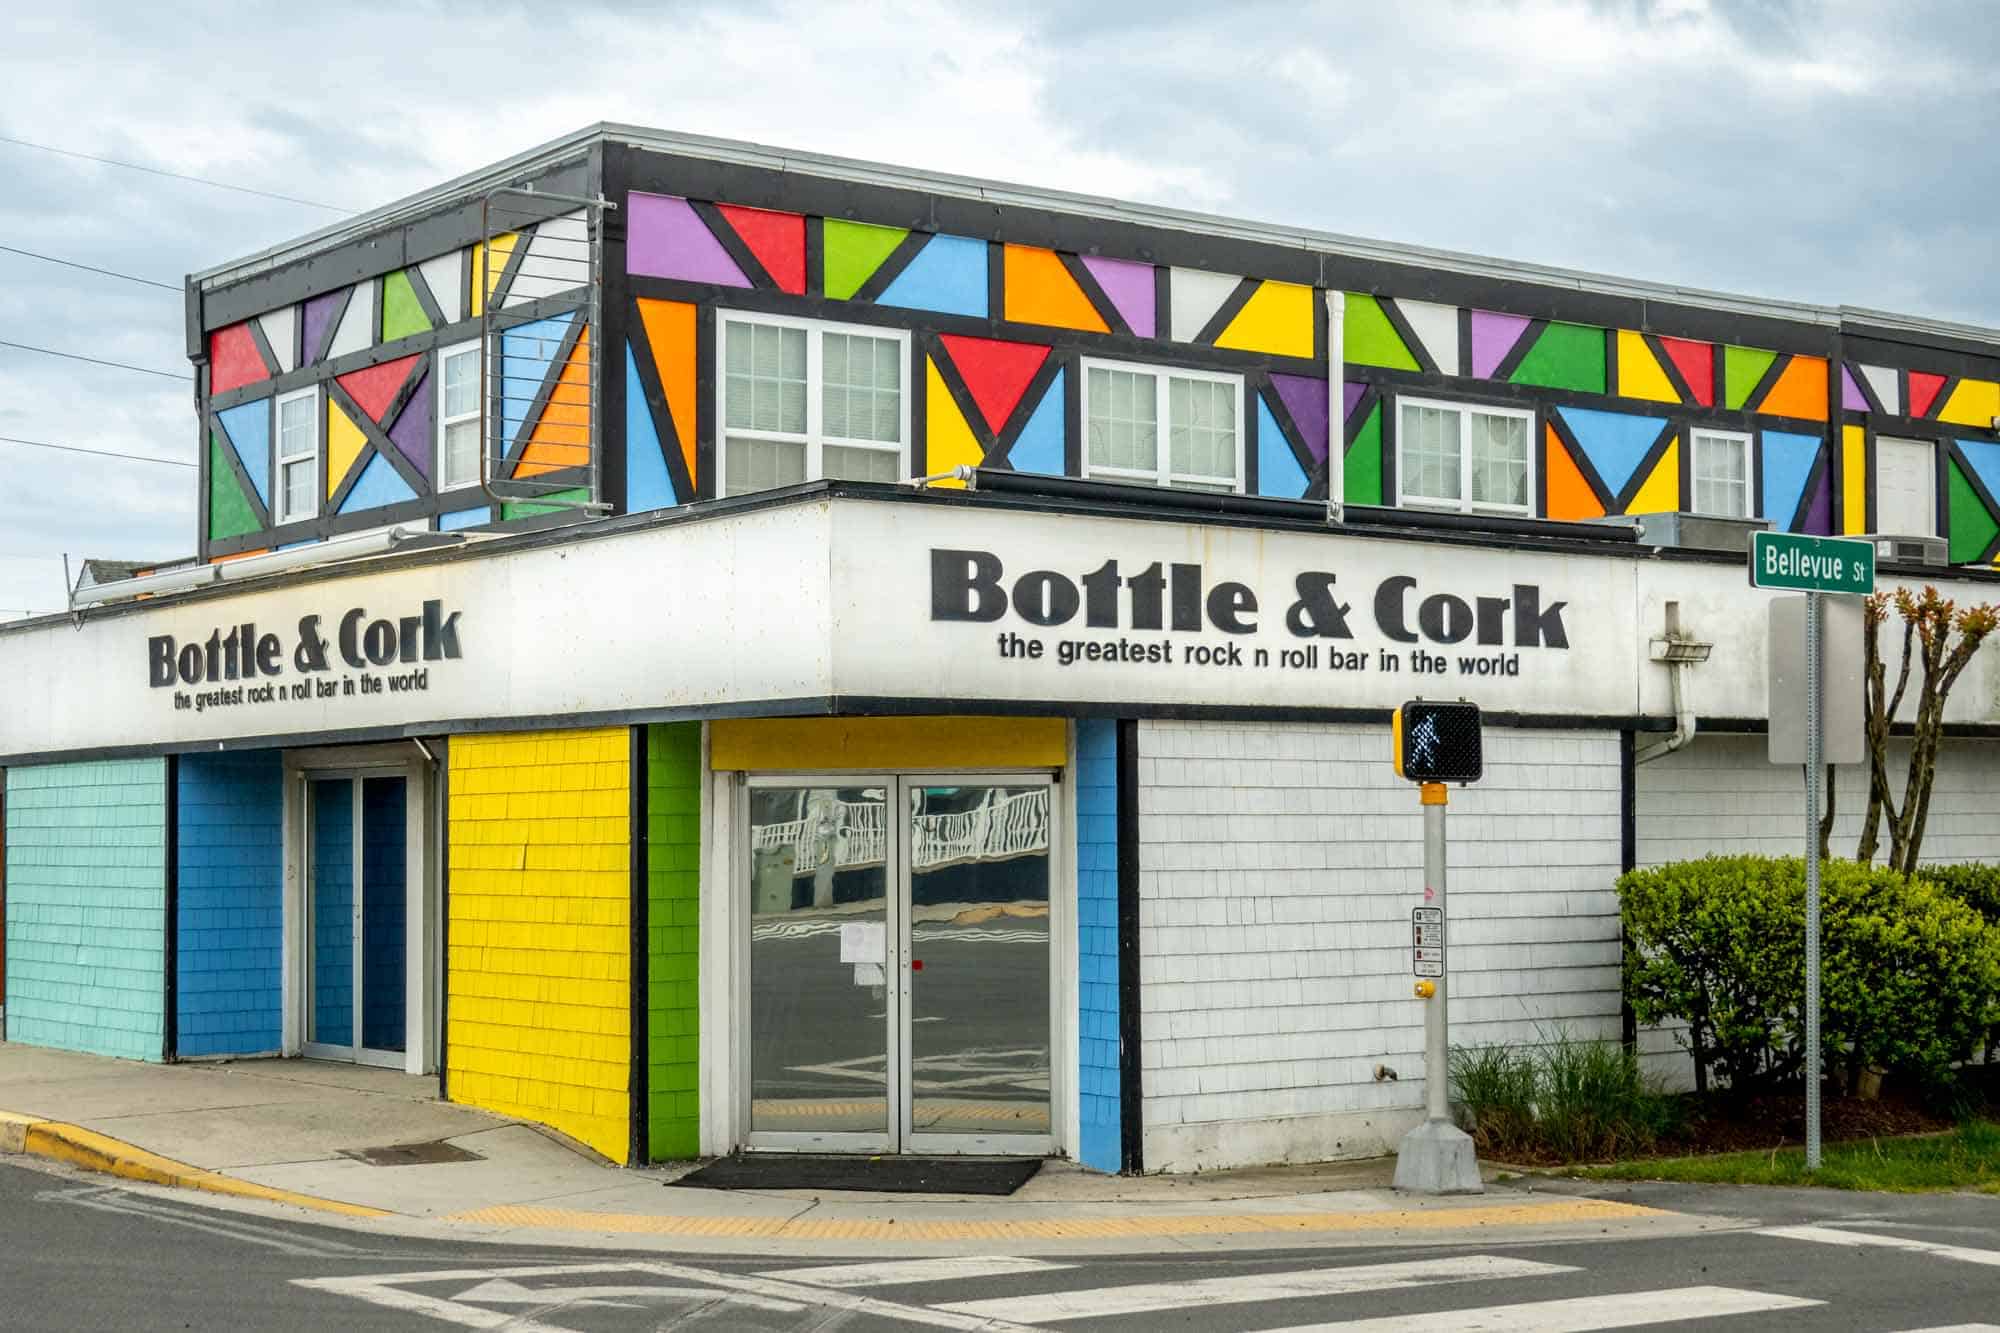 Building with primary color geometric designs and a sign: "Bottle & Cork, the greatest rock n roll bar in the world"